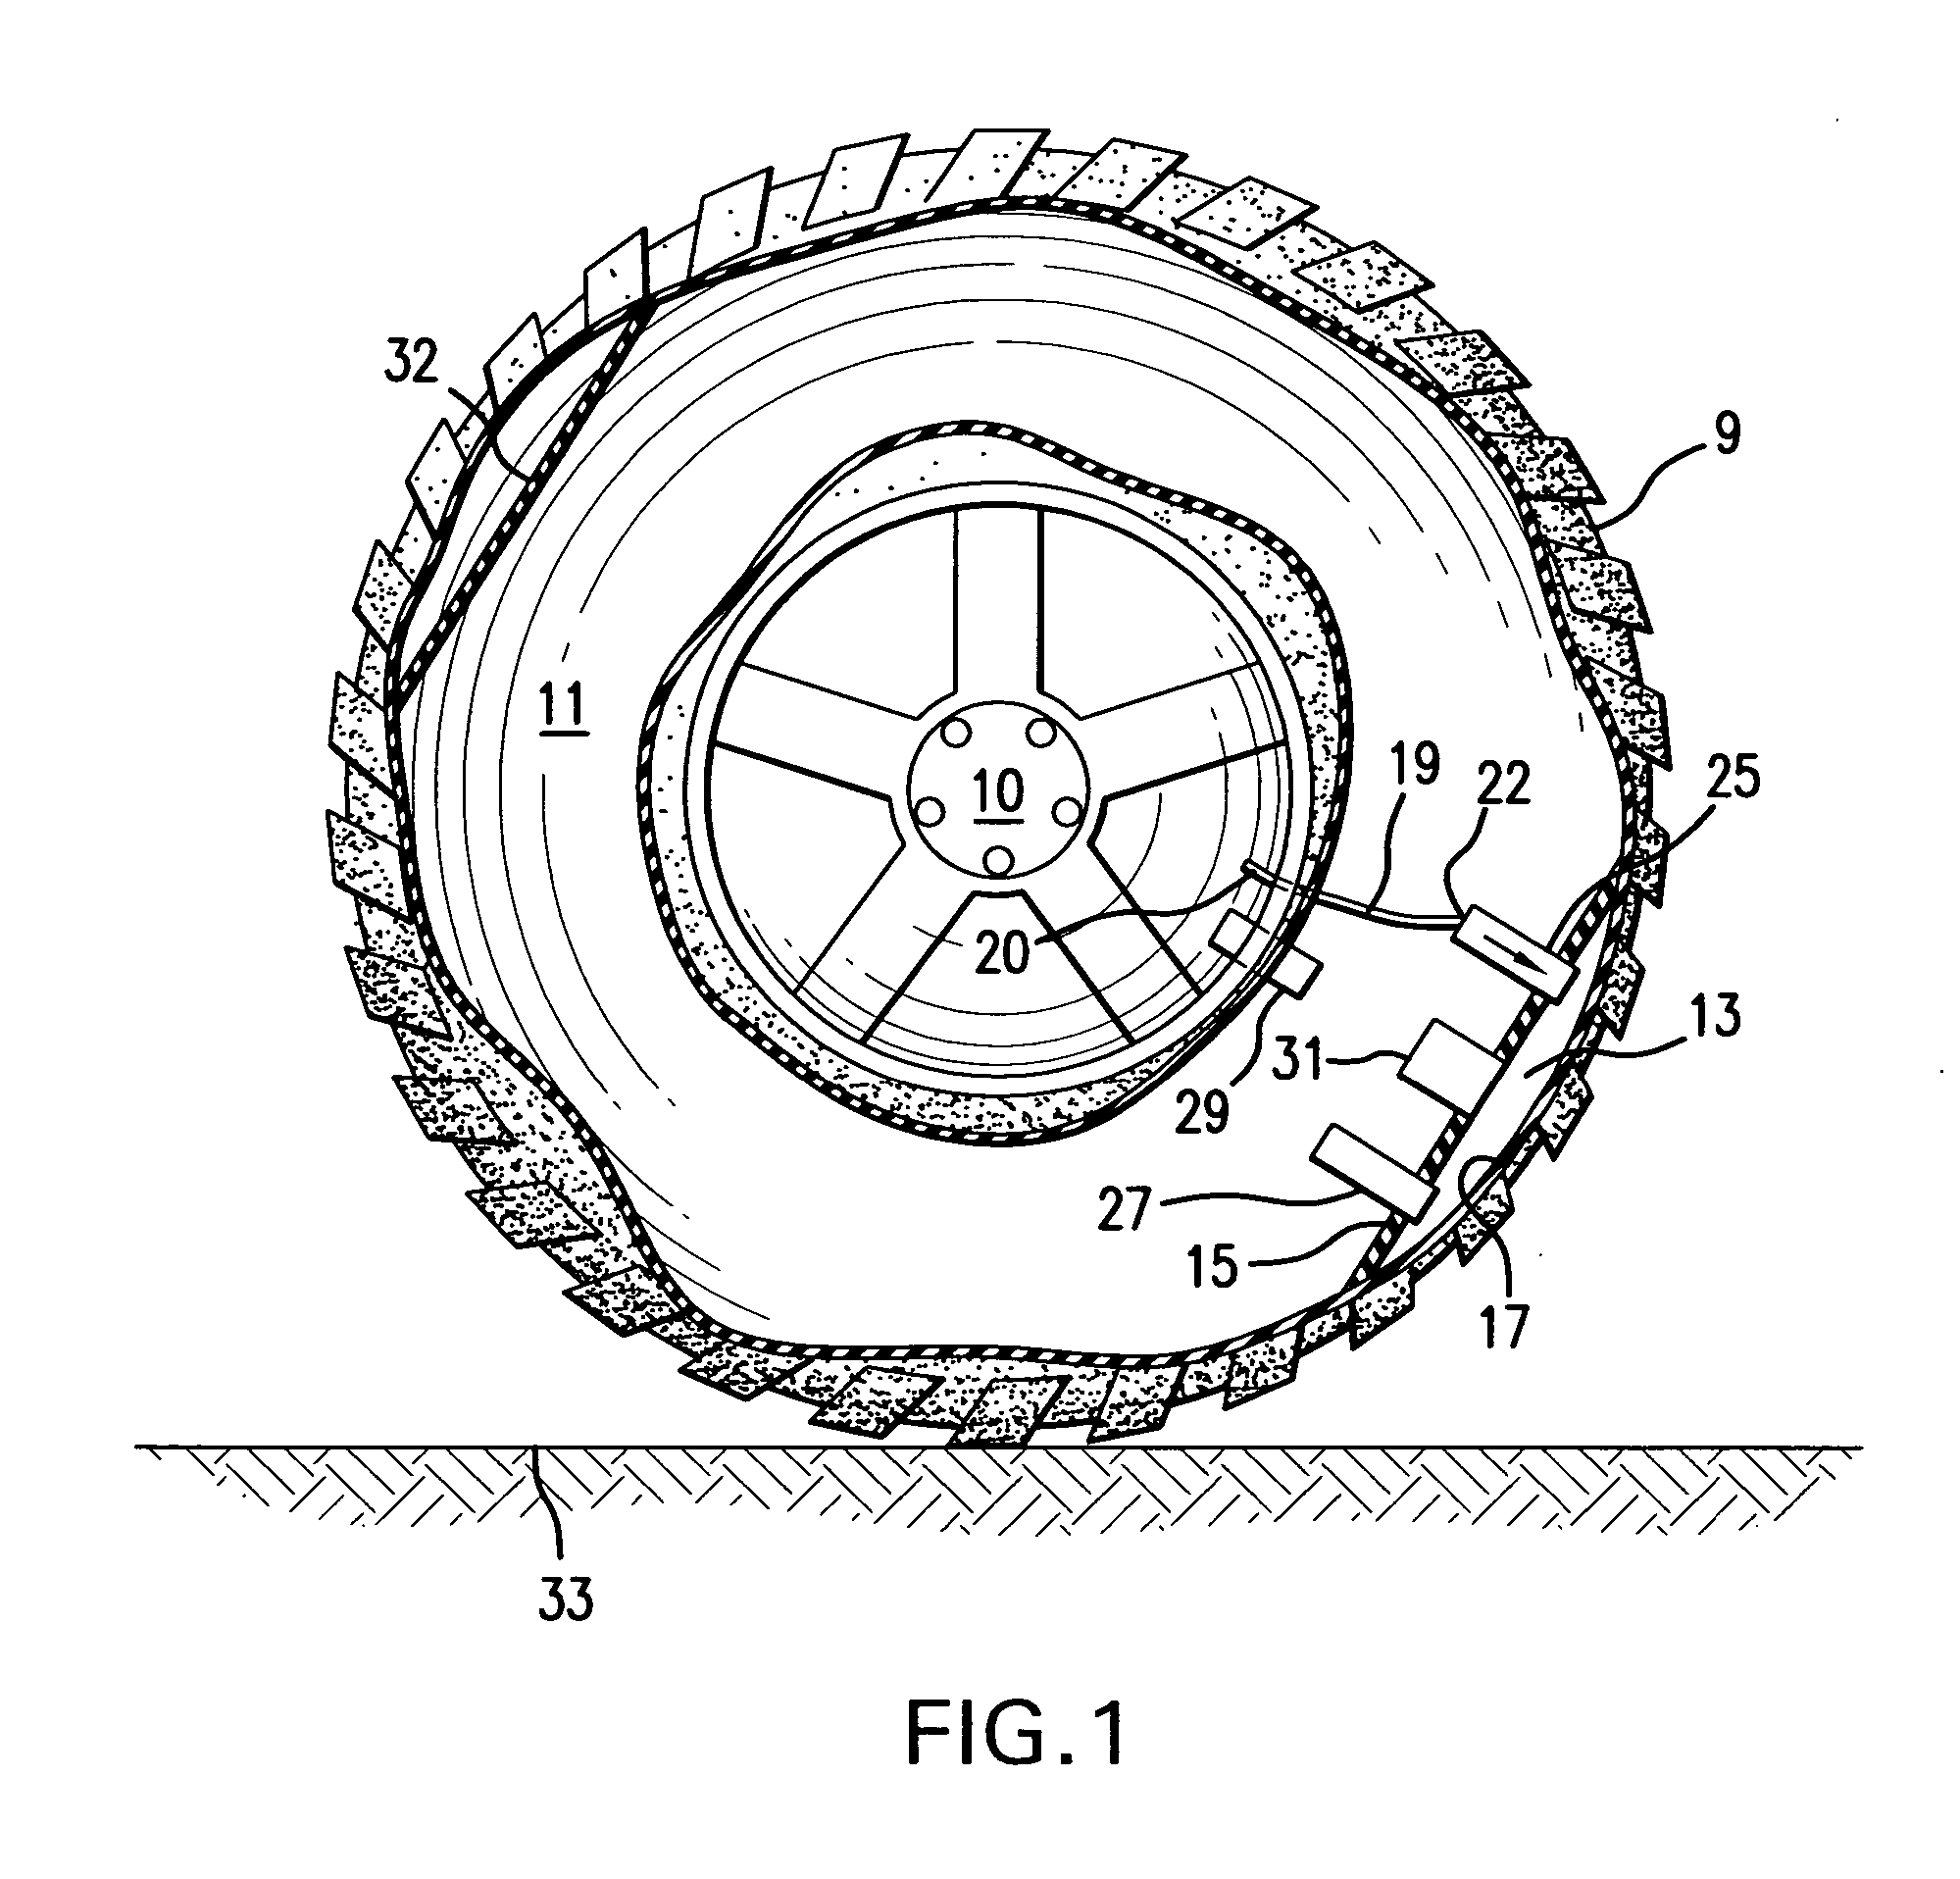 Integral pressure regulation system for tires and other vessels containing compressible fluids